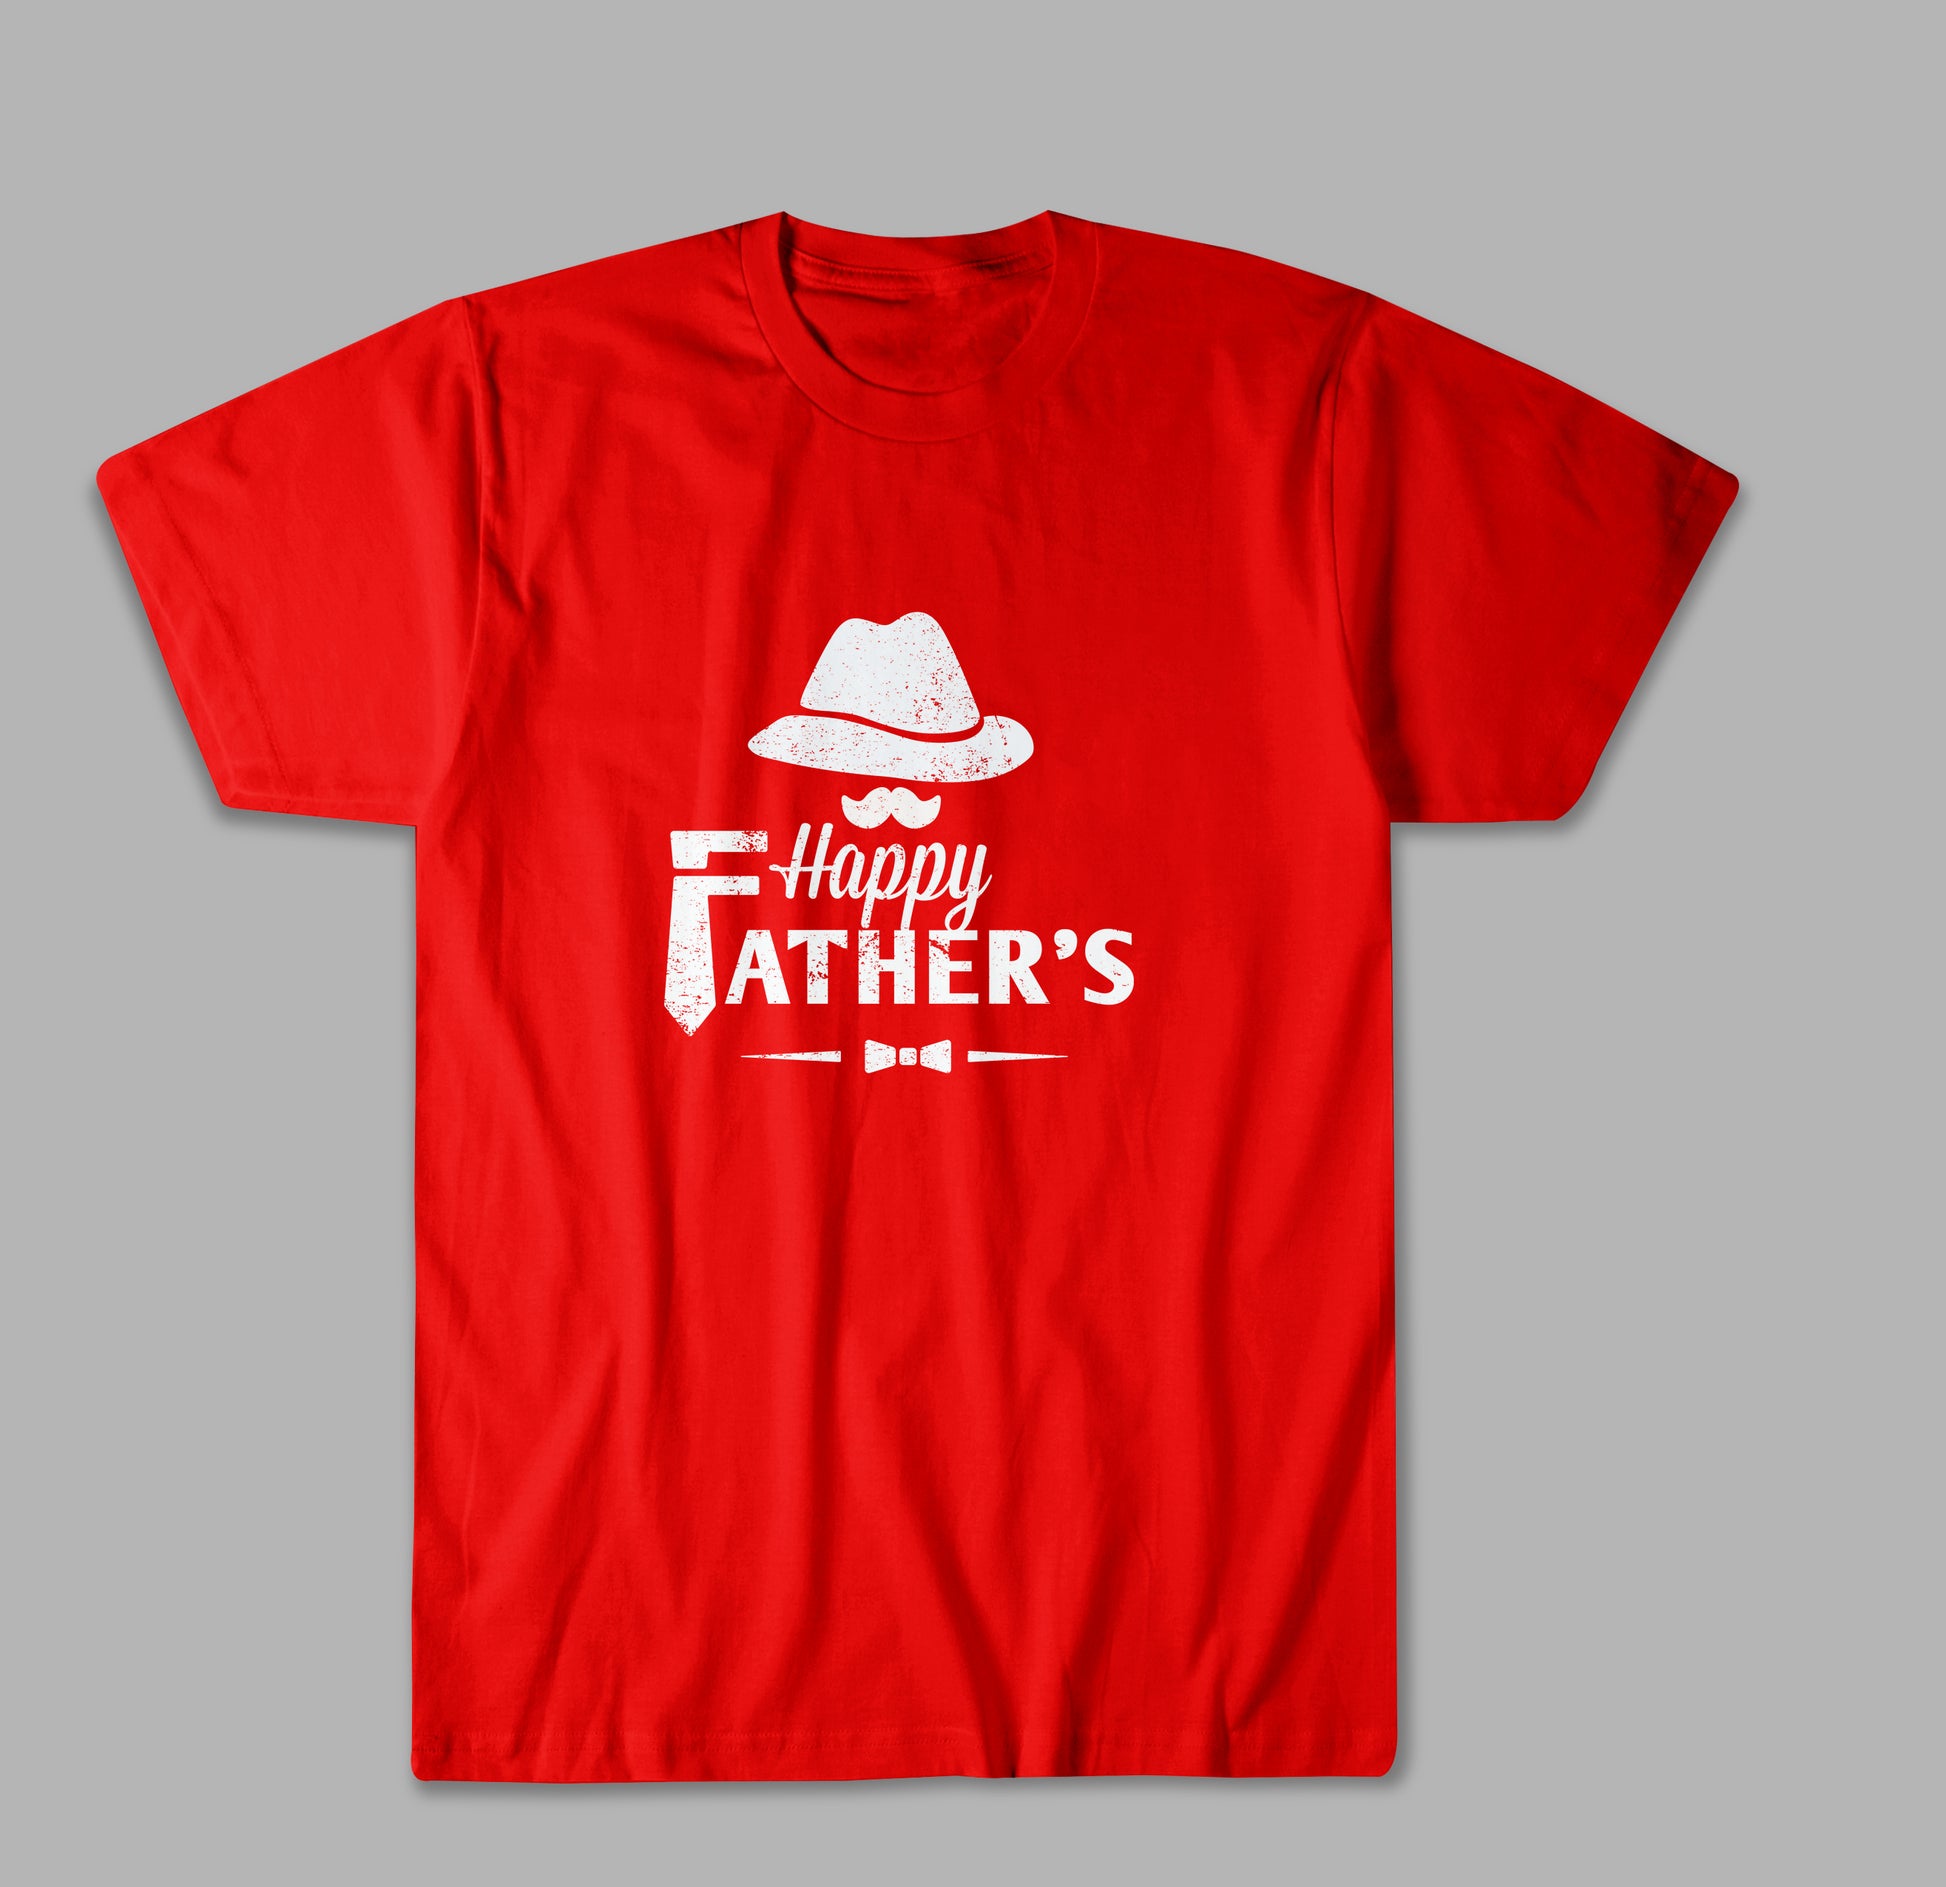 Happy FATHER'S Happy Father‘s Day T Shirt PJ3